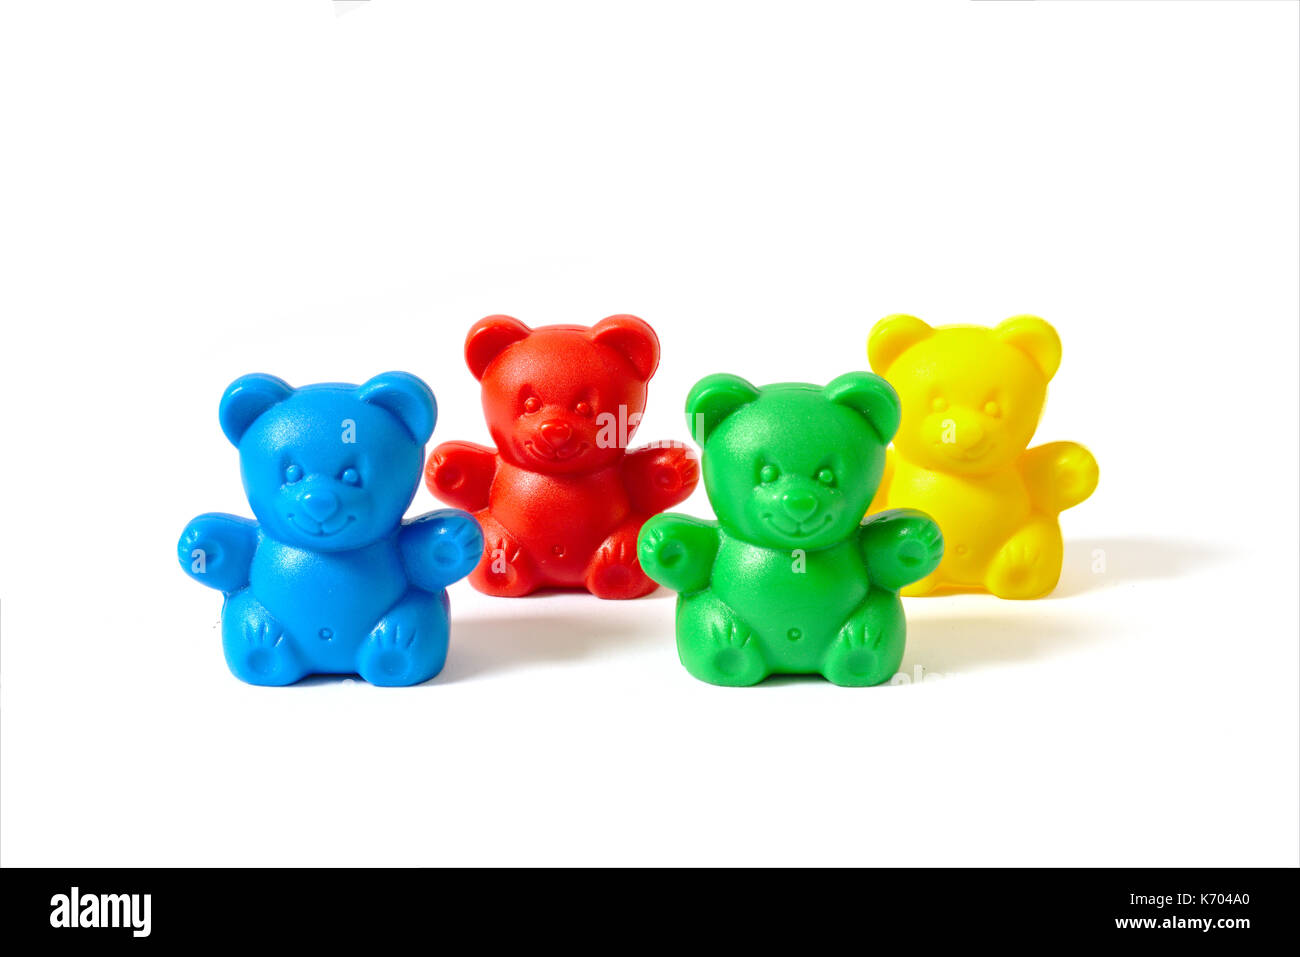 Small blue, red, yellow and green plastic toy bears isolated on white background arranged in two rows Stock Photo